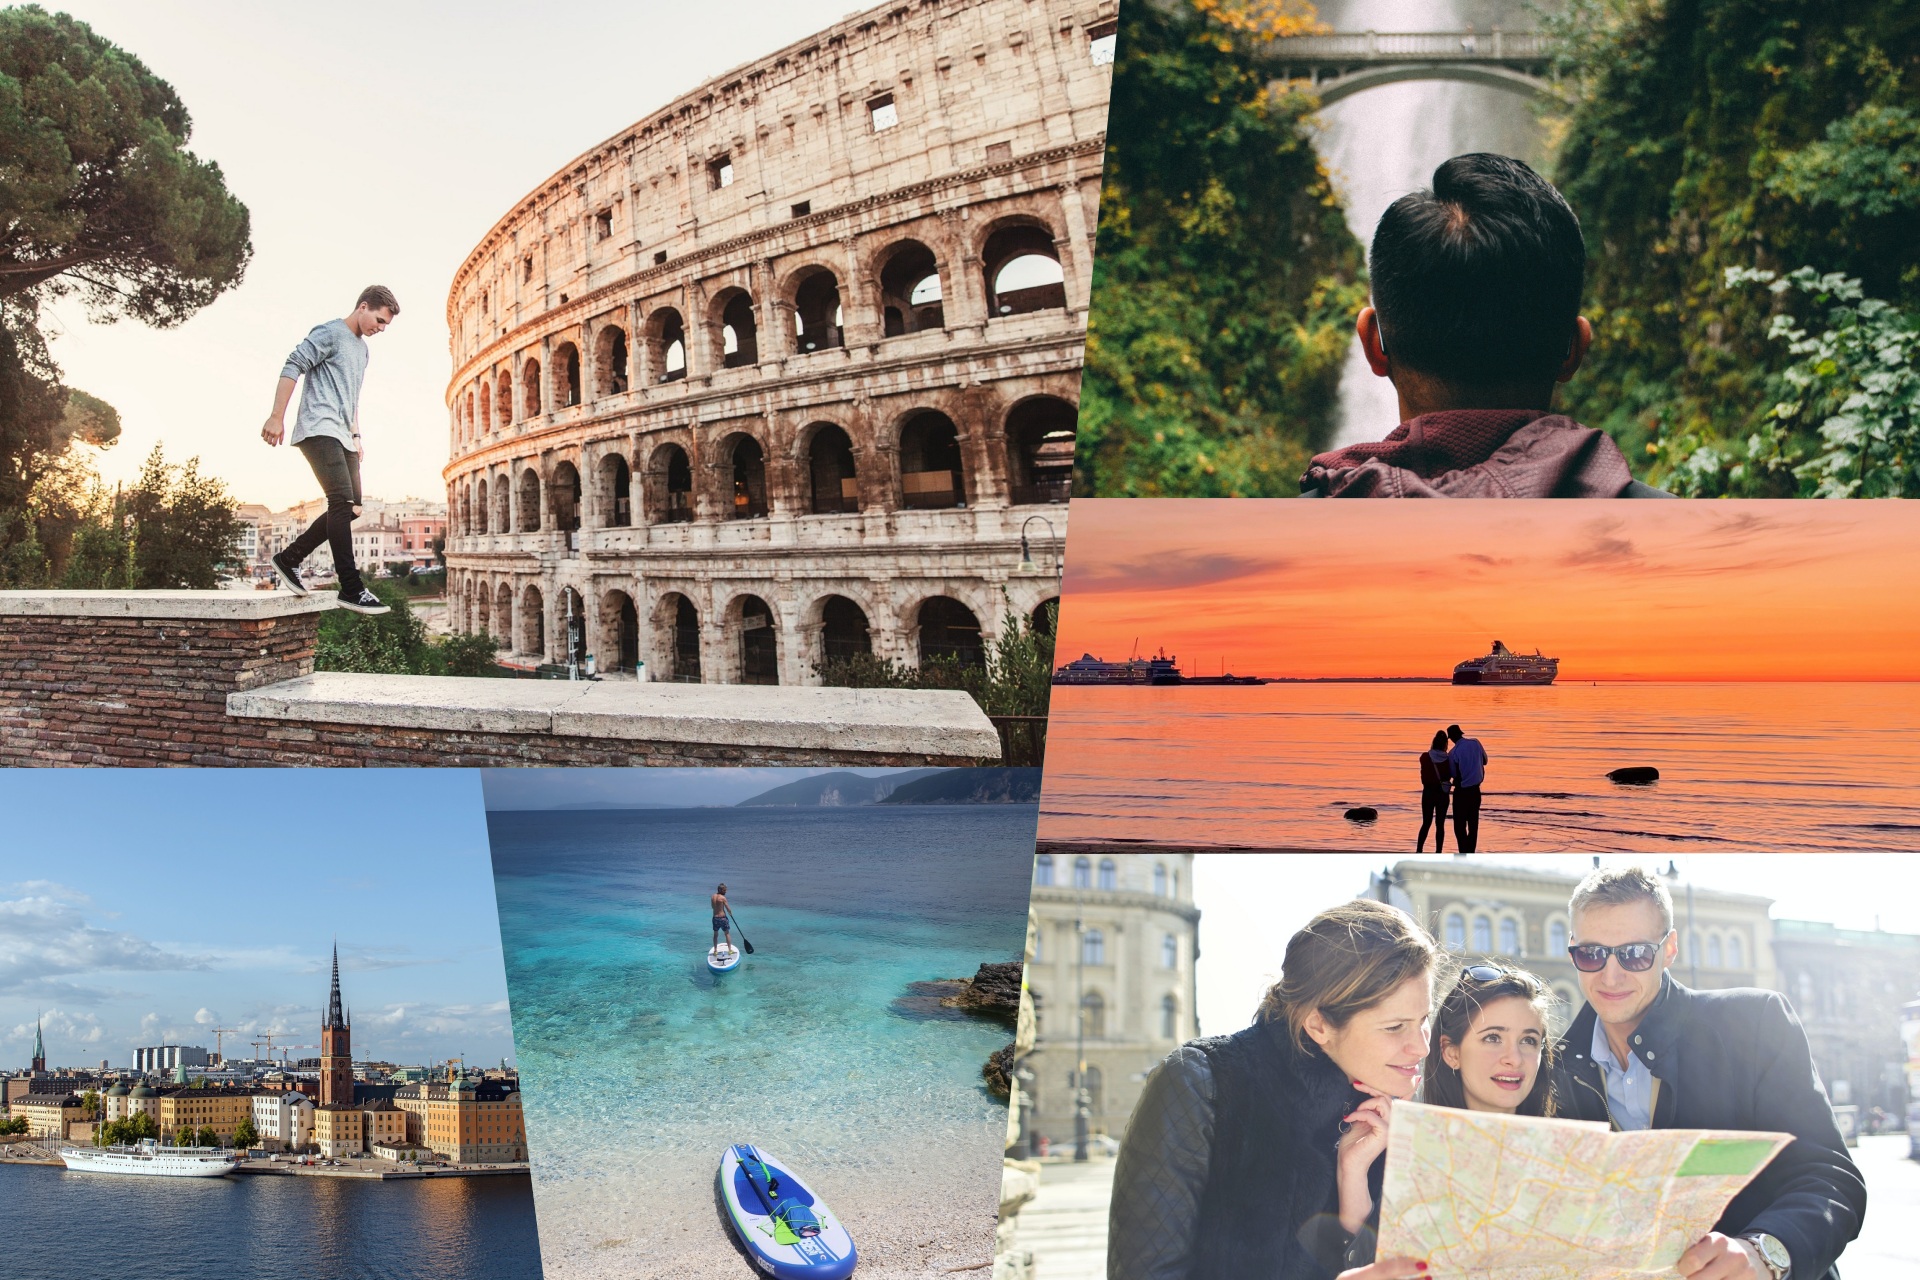 Collage of man walking by Colosseum in Rome, Man hiking looking at a waterfall, couple on a beach, friends looking at a map, man on a paddleboard, Stockholm